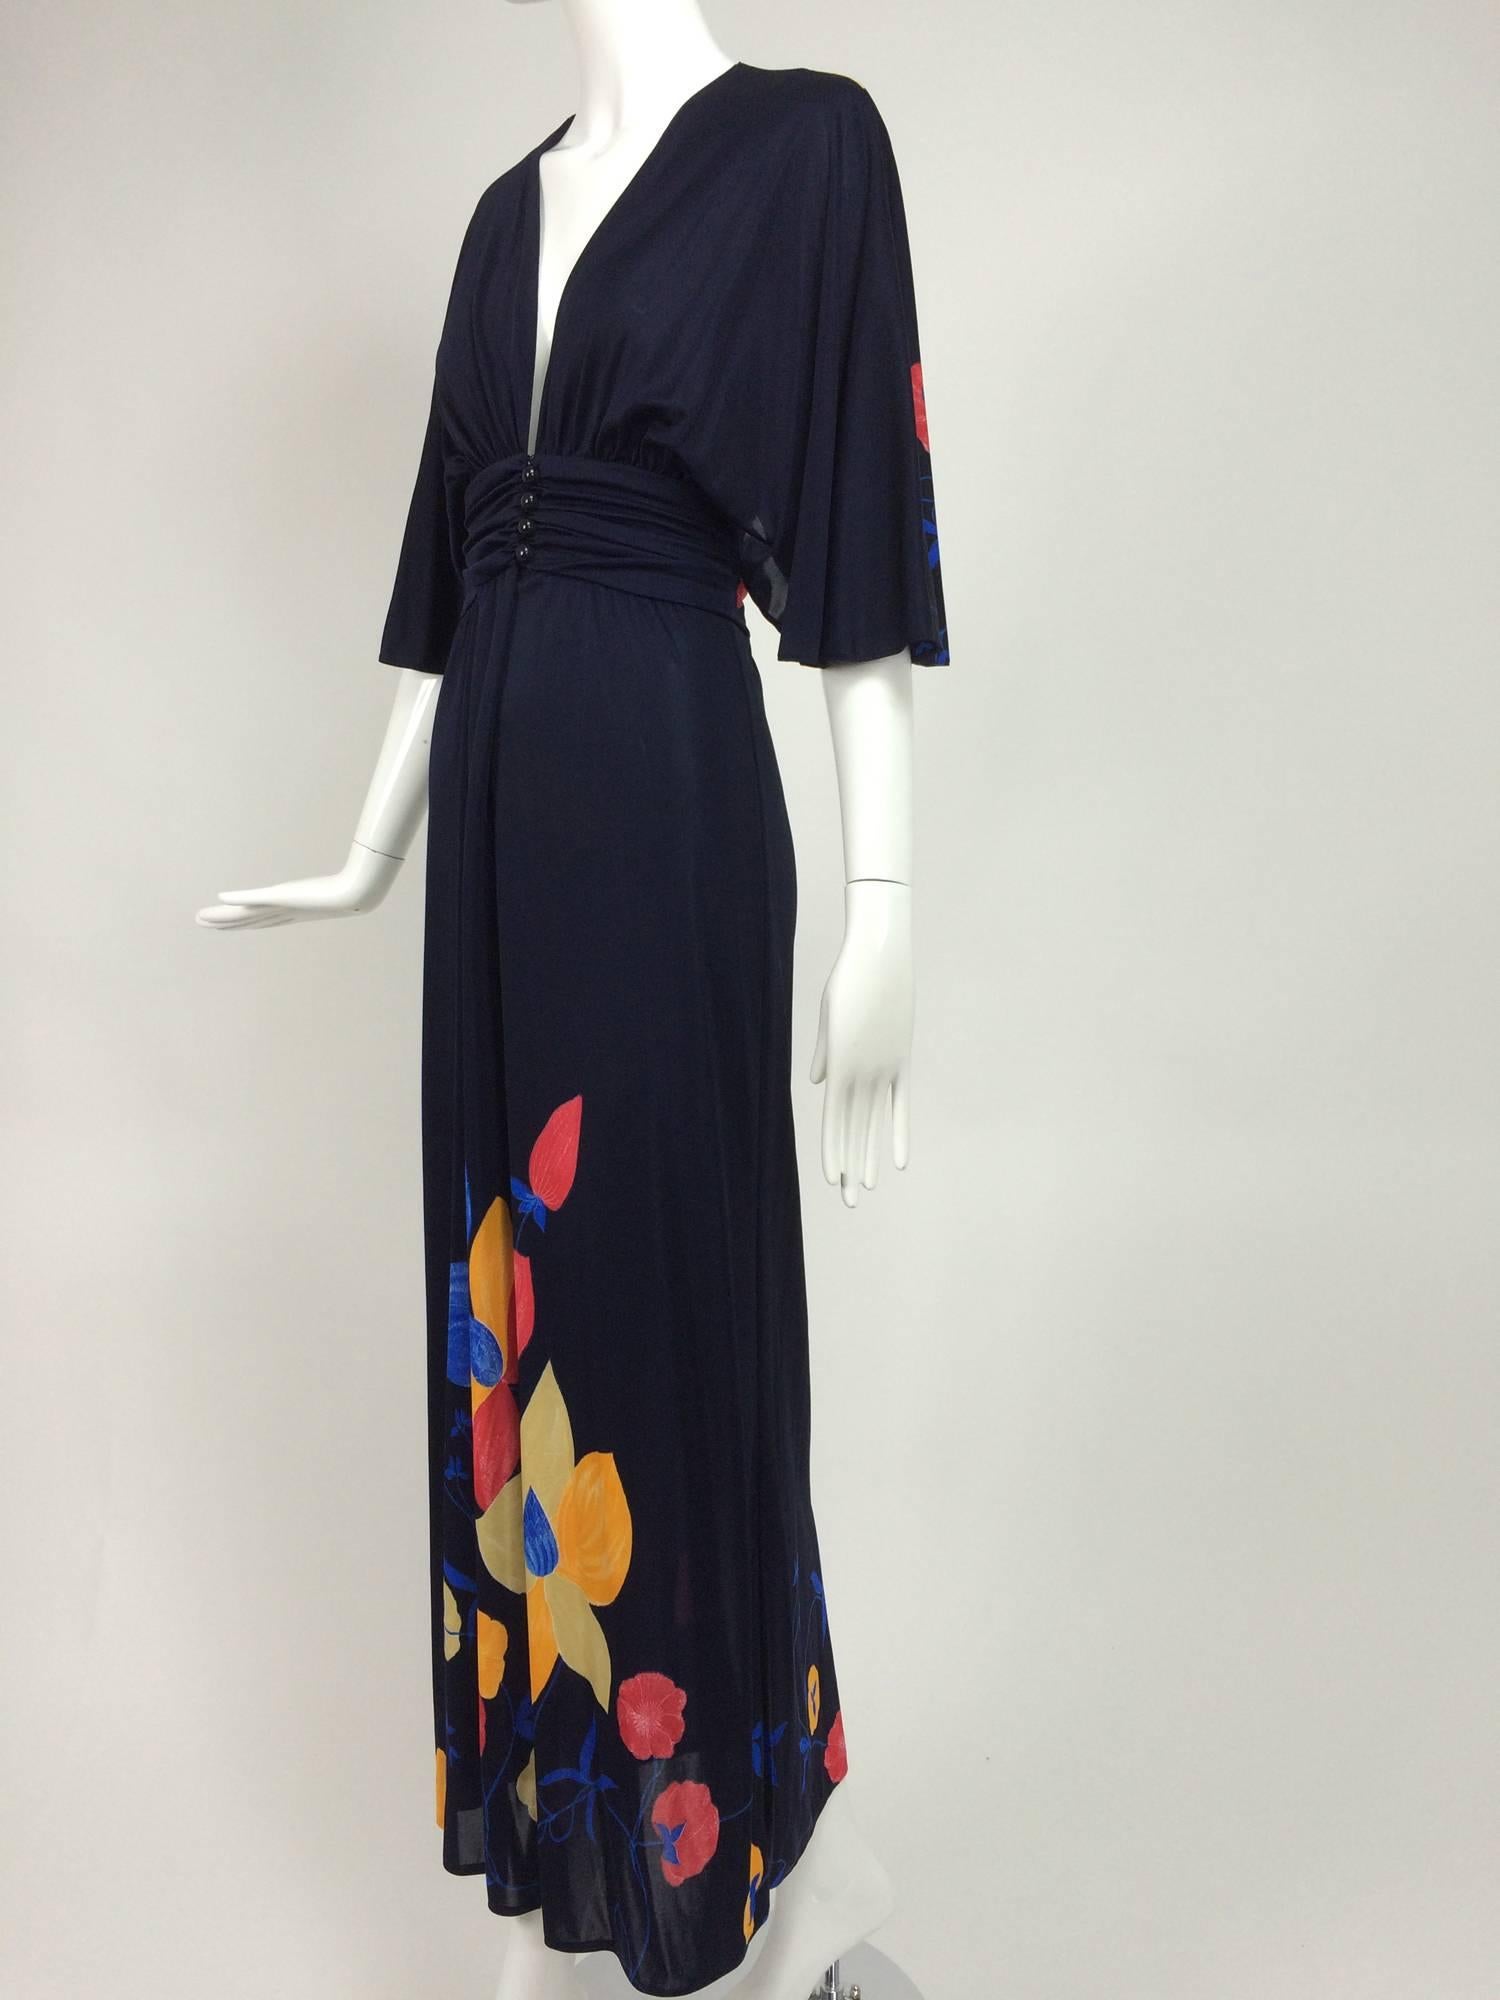 Mac Tac of Paris dark blue colourful floral jersey maxi dress 1970s...Silky nylon (feels nice) in dark navy blue with a bright primary colour print...The dress has a deep plunge neckline and closes at the waist with buttons and a hook &